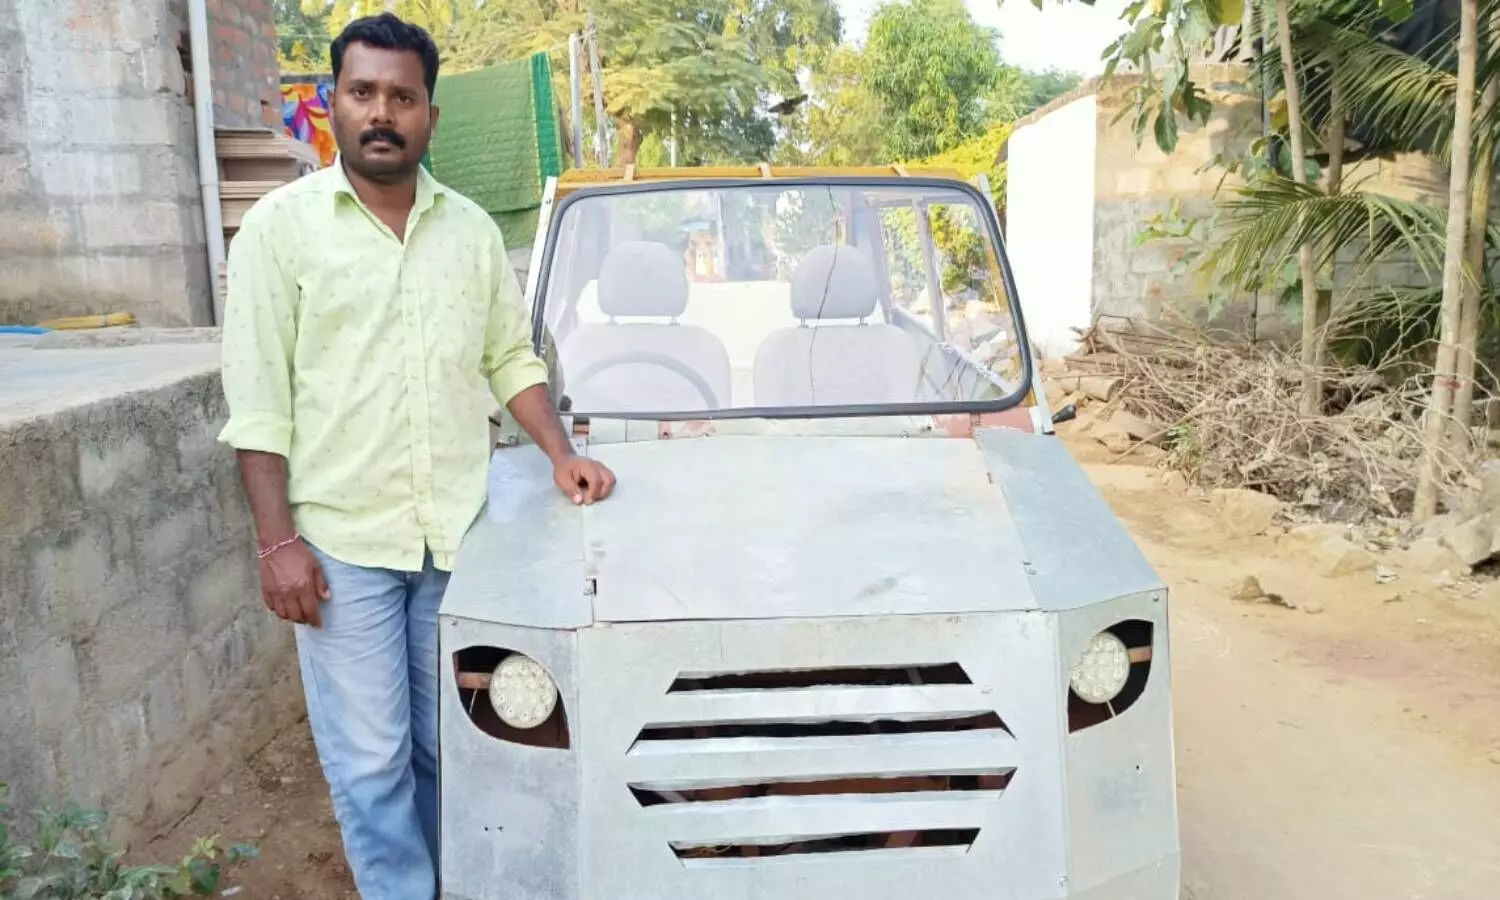 I believed I could do it: Warangal TV mechanic builds electric car with spare parts